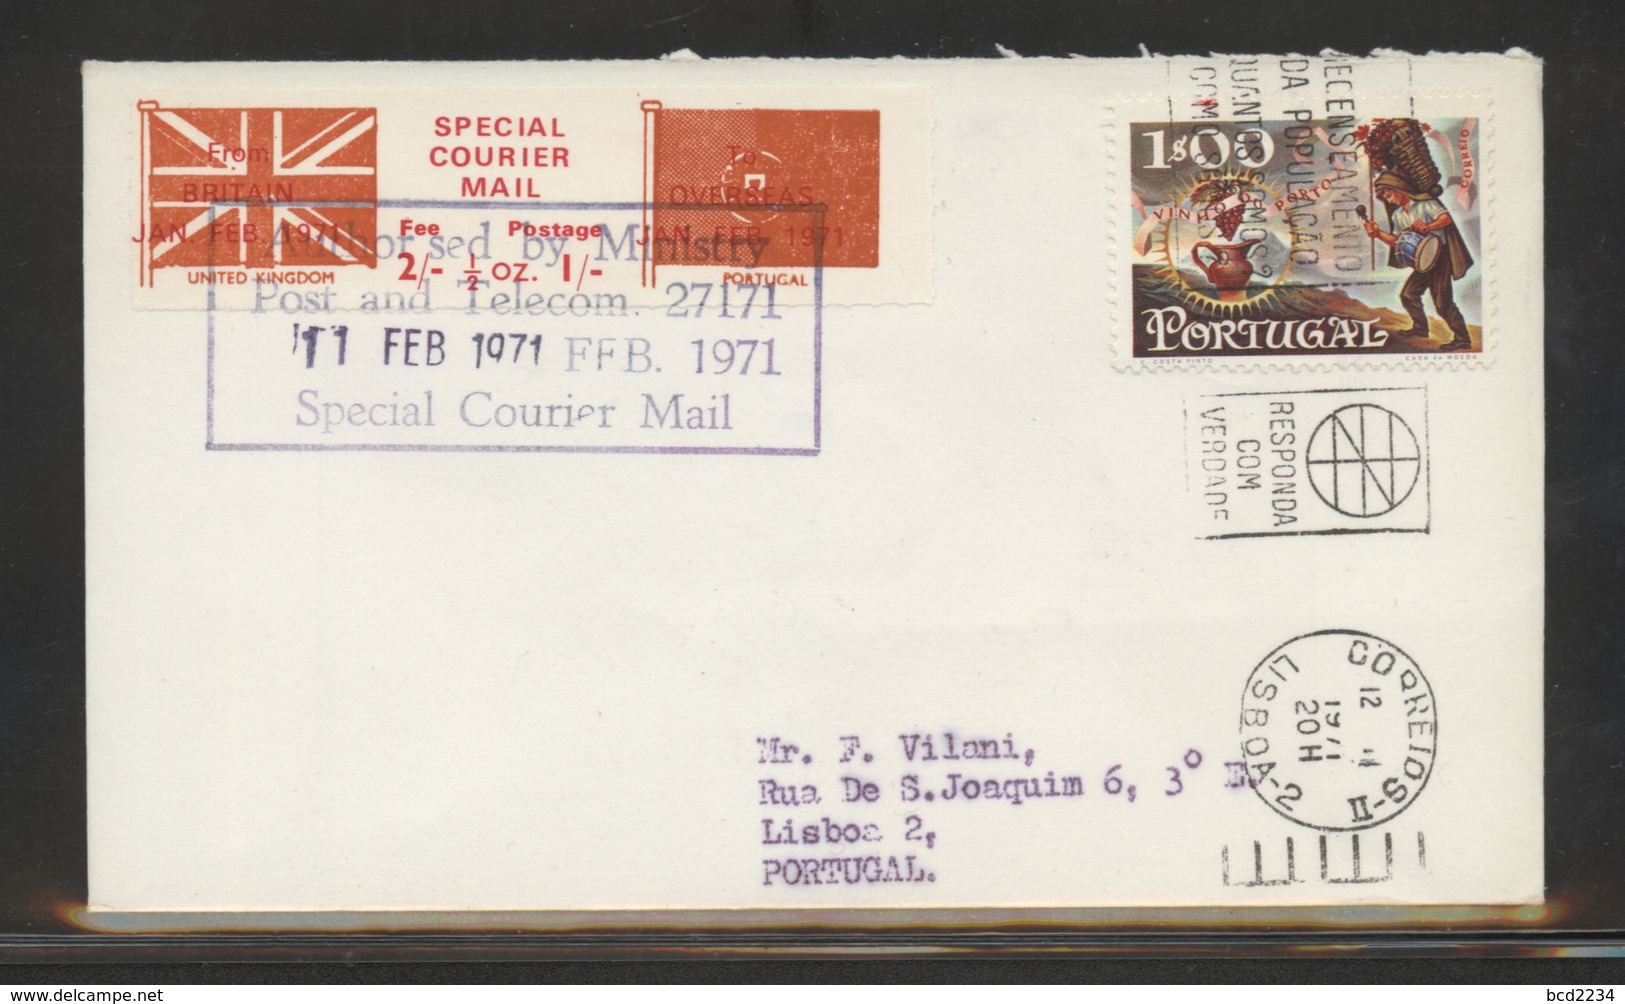 GREAT BRITAIN GB 1971 POSTAL STRIKE MAIL SPECIAL COURIER MAIL 1ST ISSUE PRE-DECIMAL COVER TO LISBON PORTUGAL 11 FEBRUARY - Covers & Documents